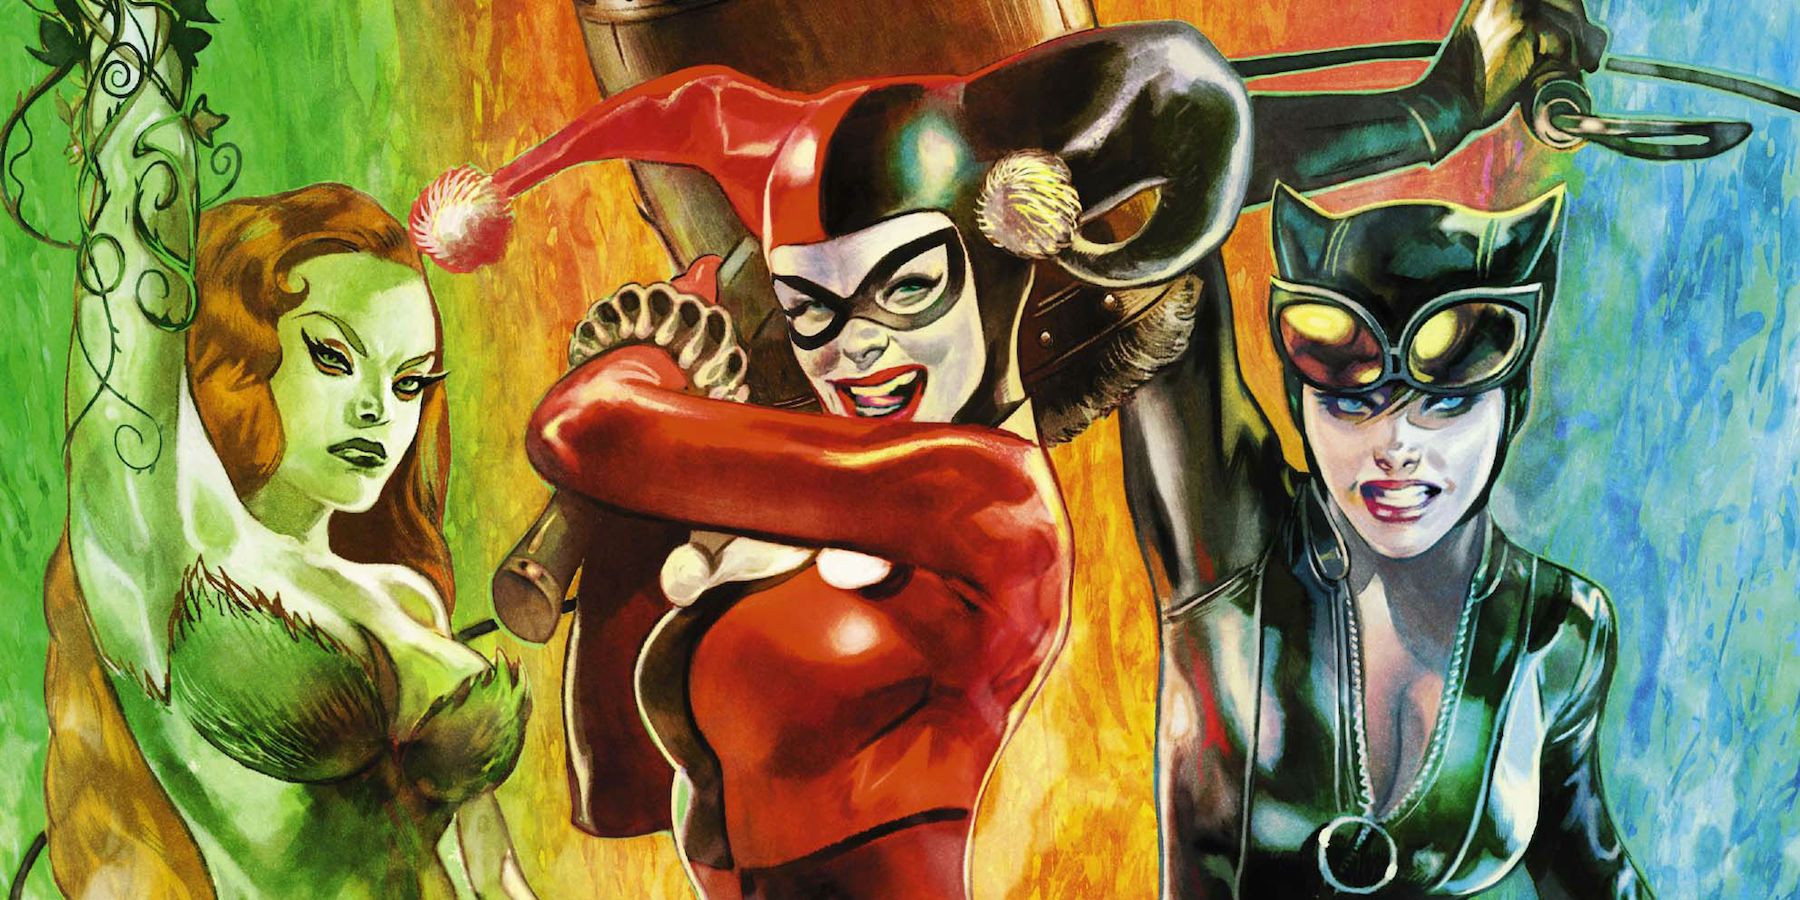 Gotham City Sirens featuring Poison Ivy, Catwoman, and Harley Quinn